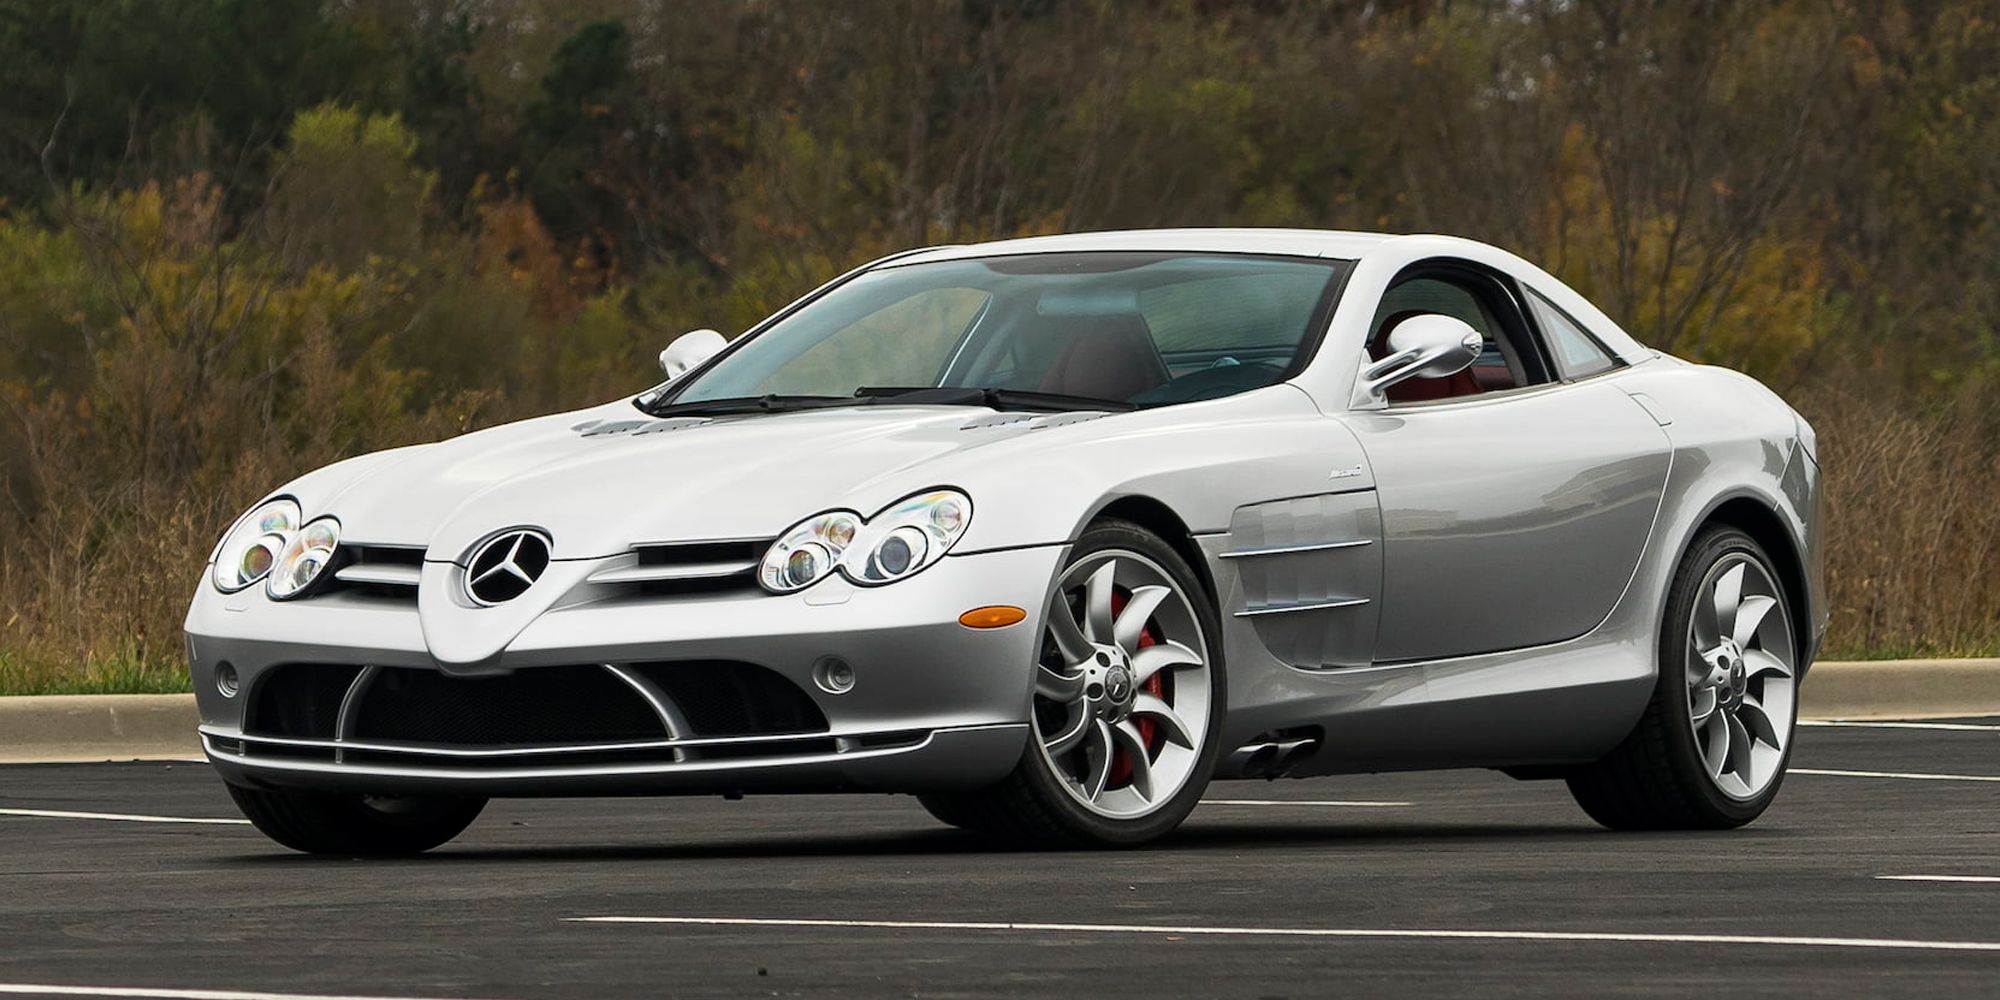 The front of the SLR McLaren